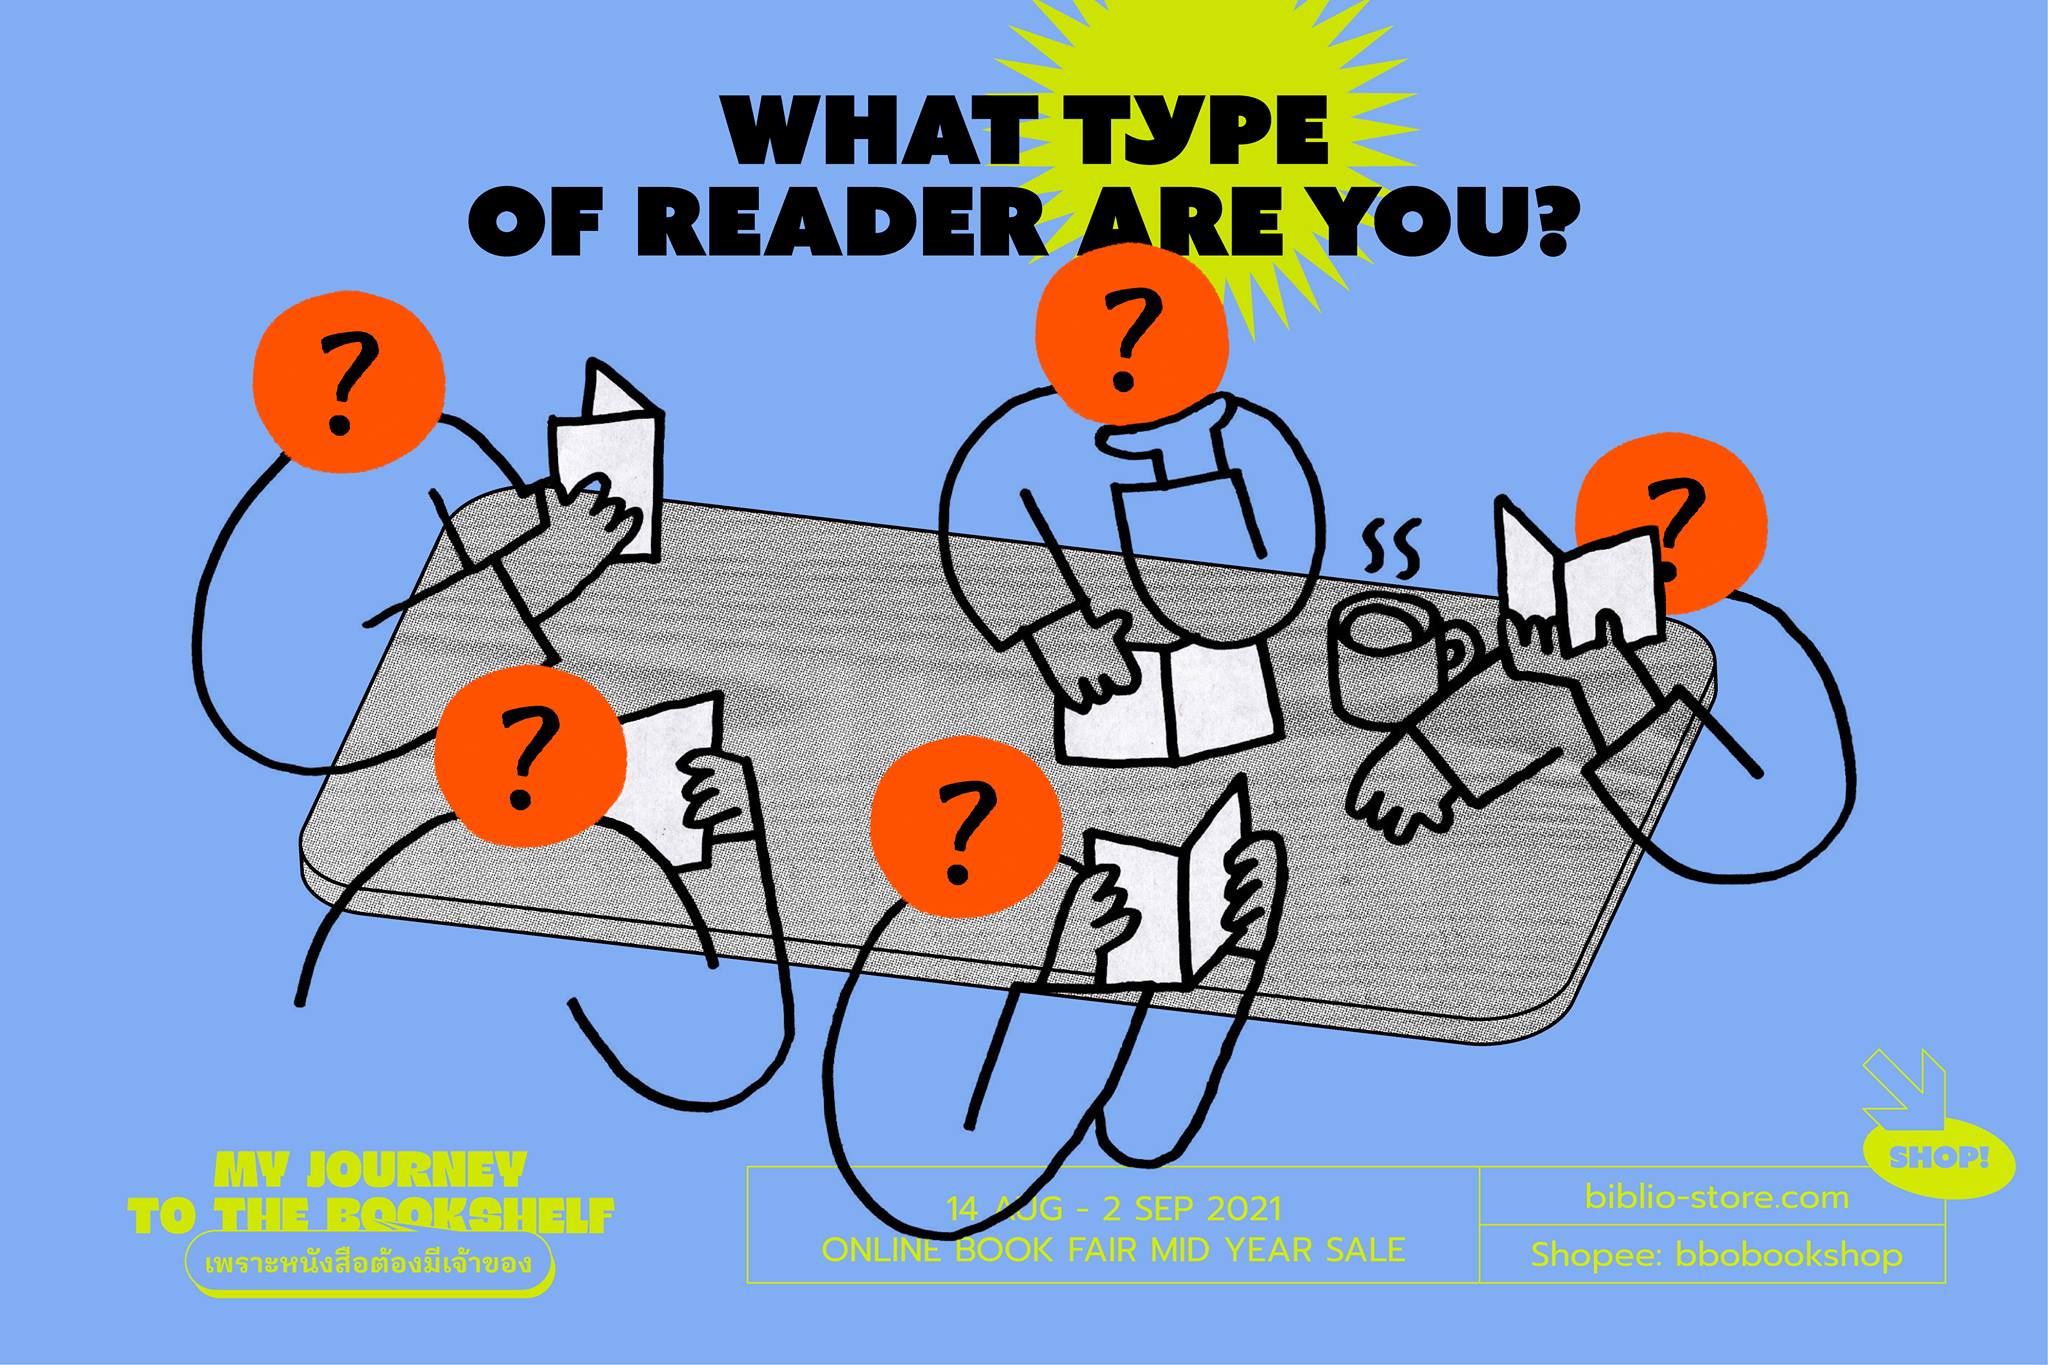 What type of reader are you ?